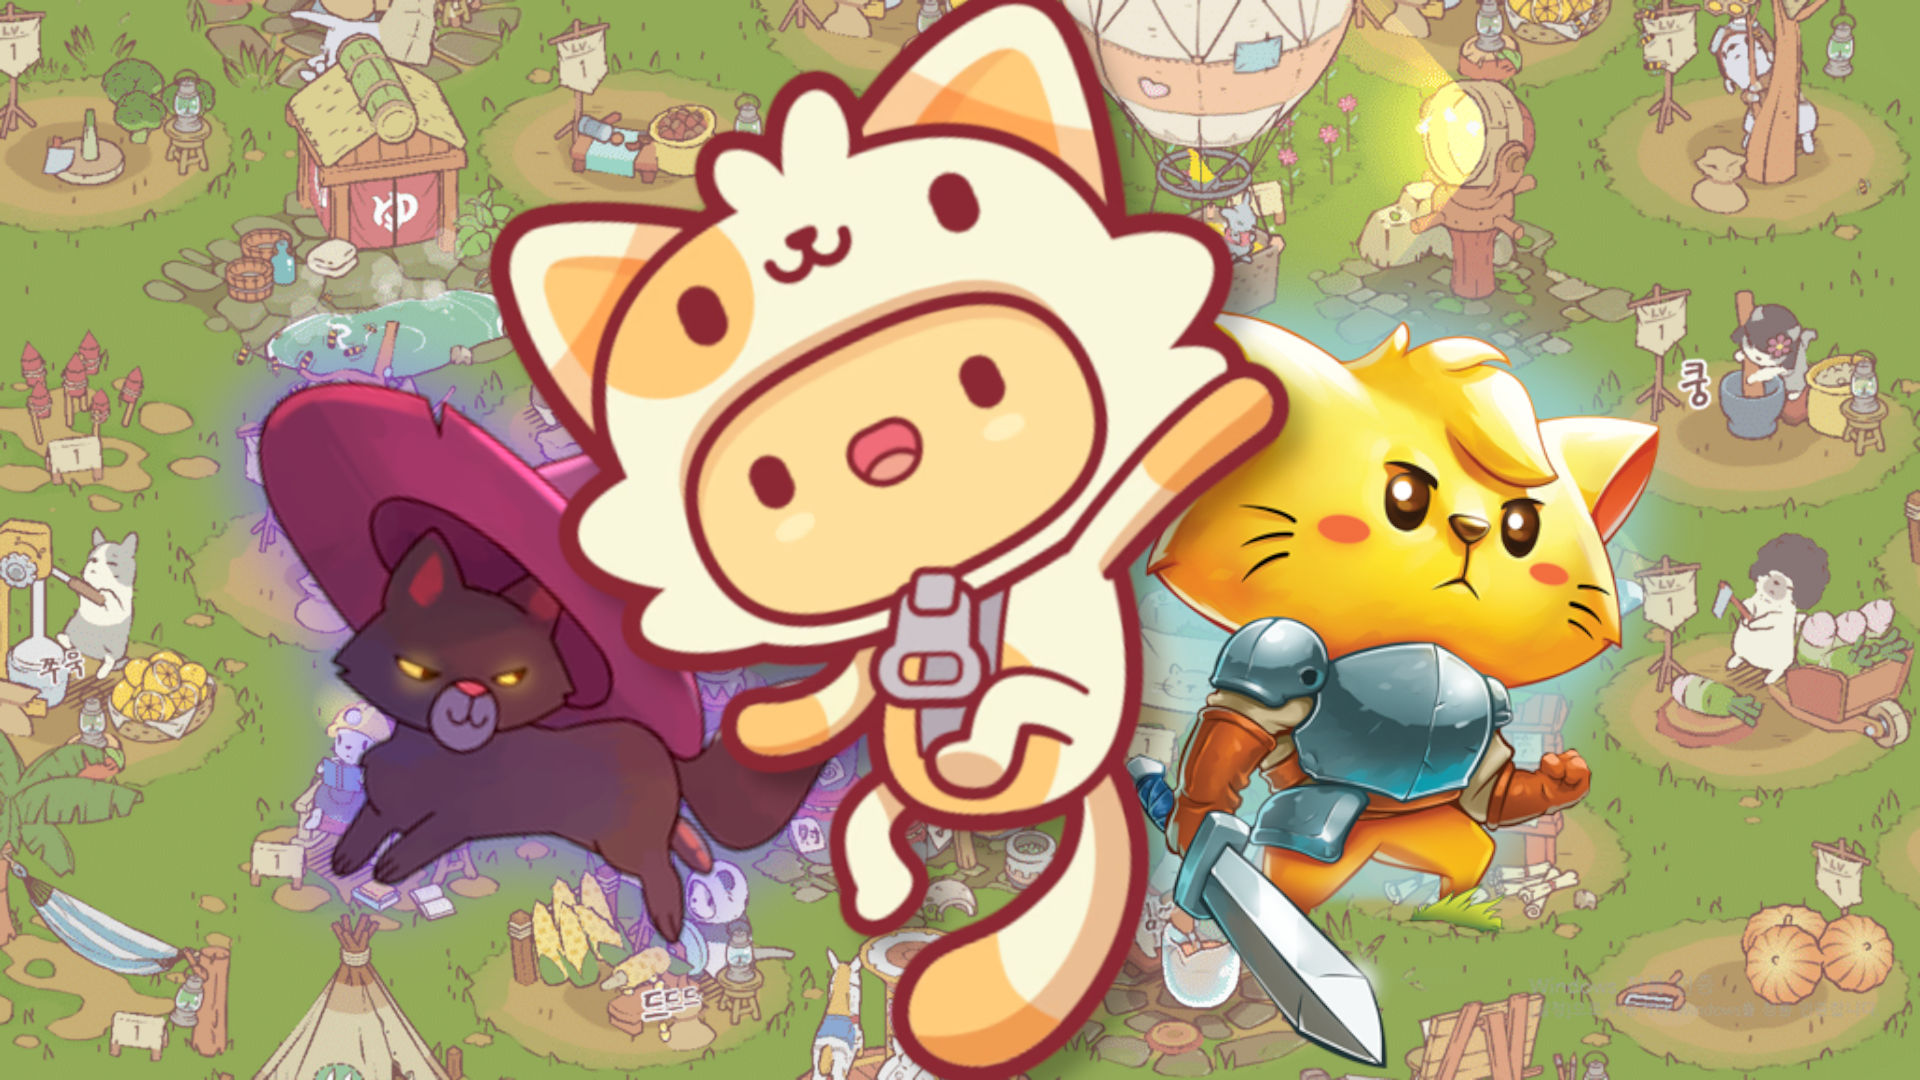 Cat Time - Cat Game, Match 3 - Apps on Google Play